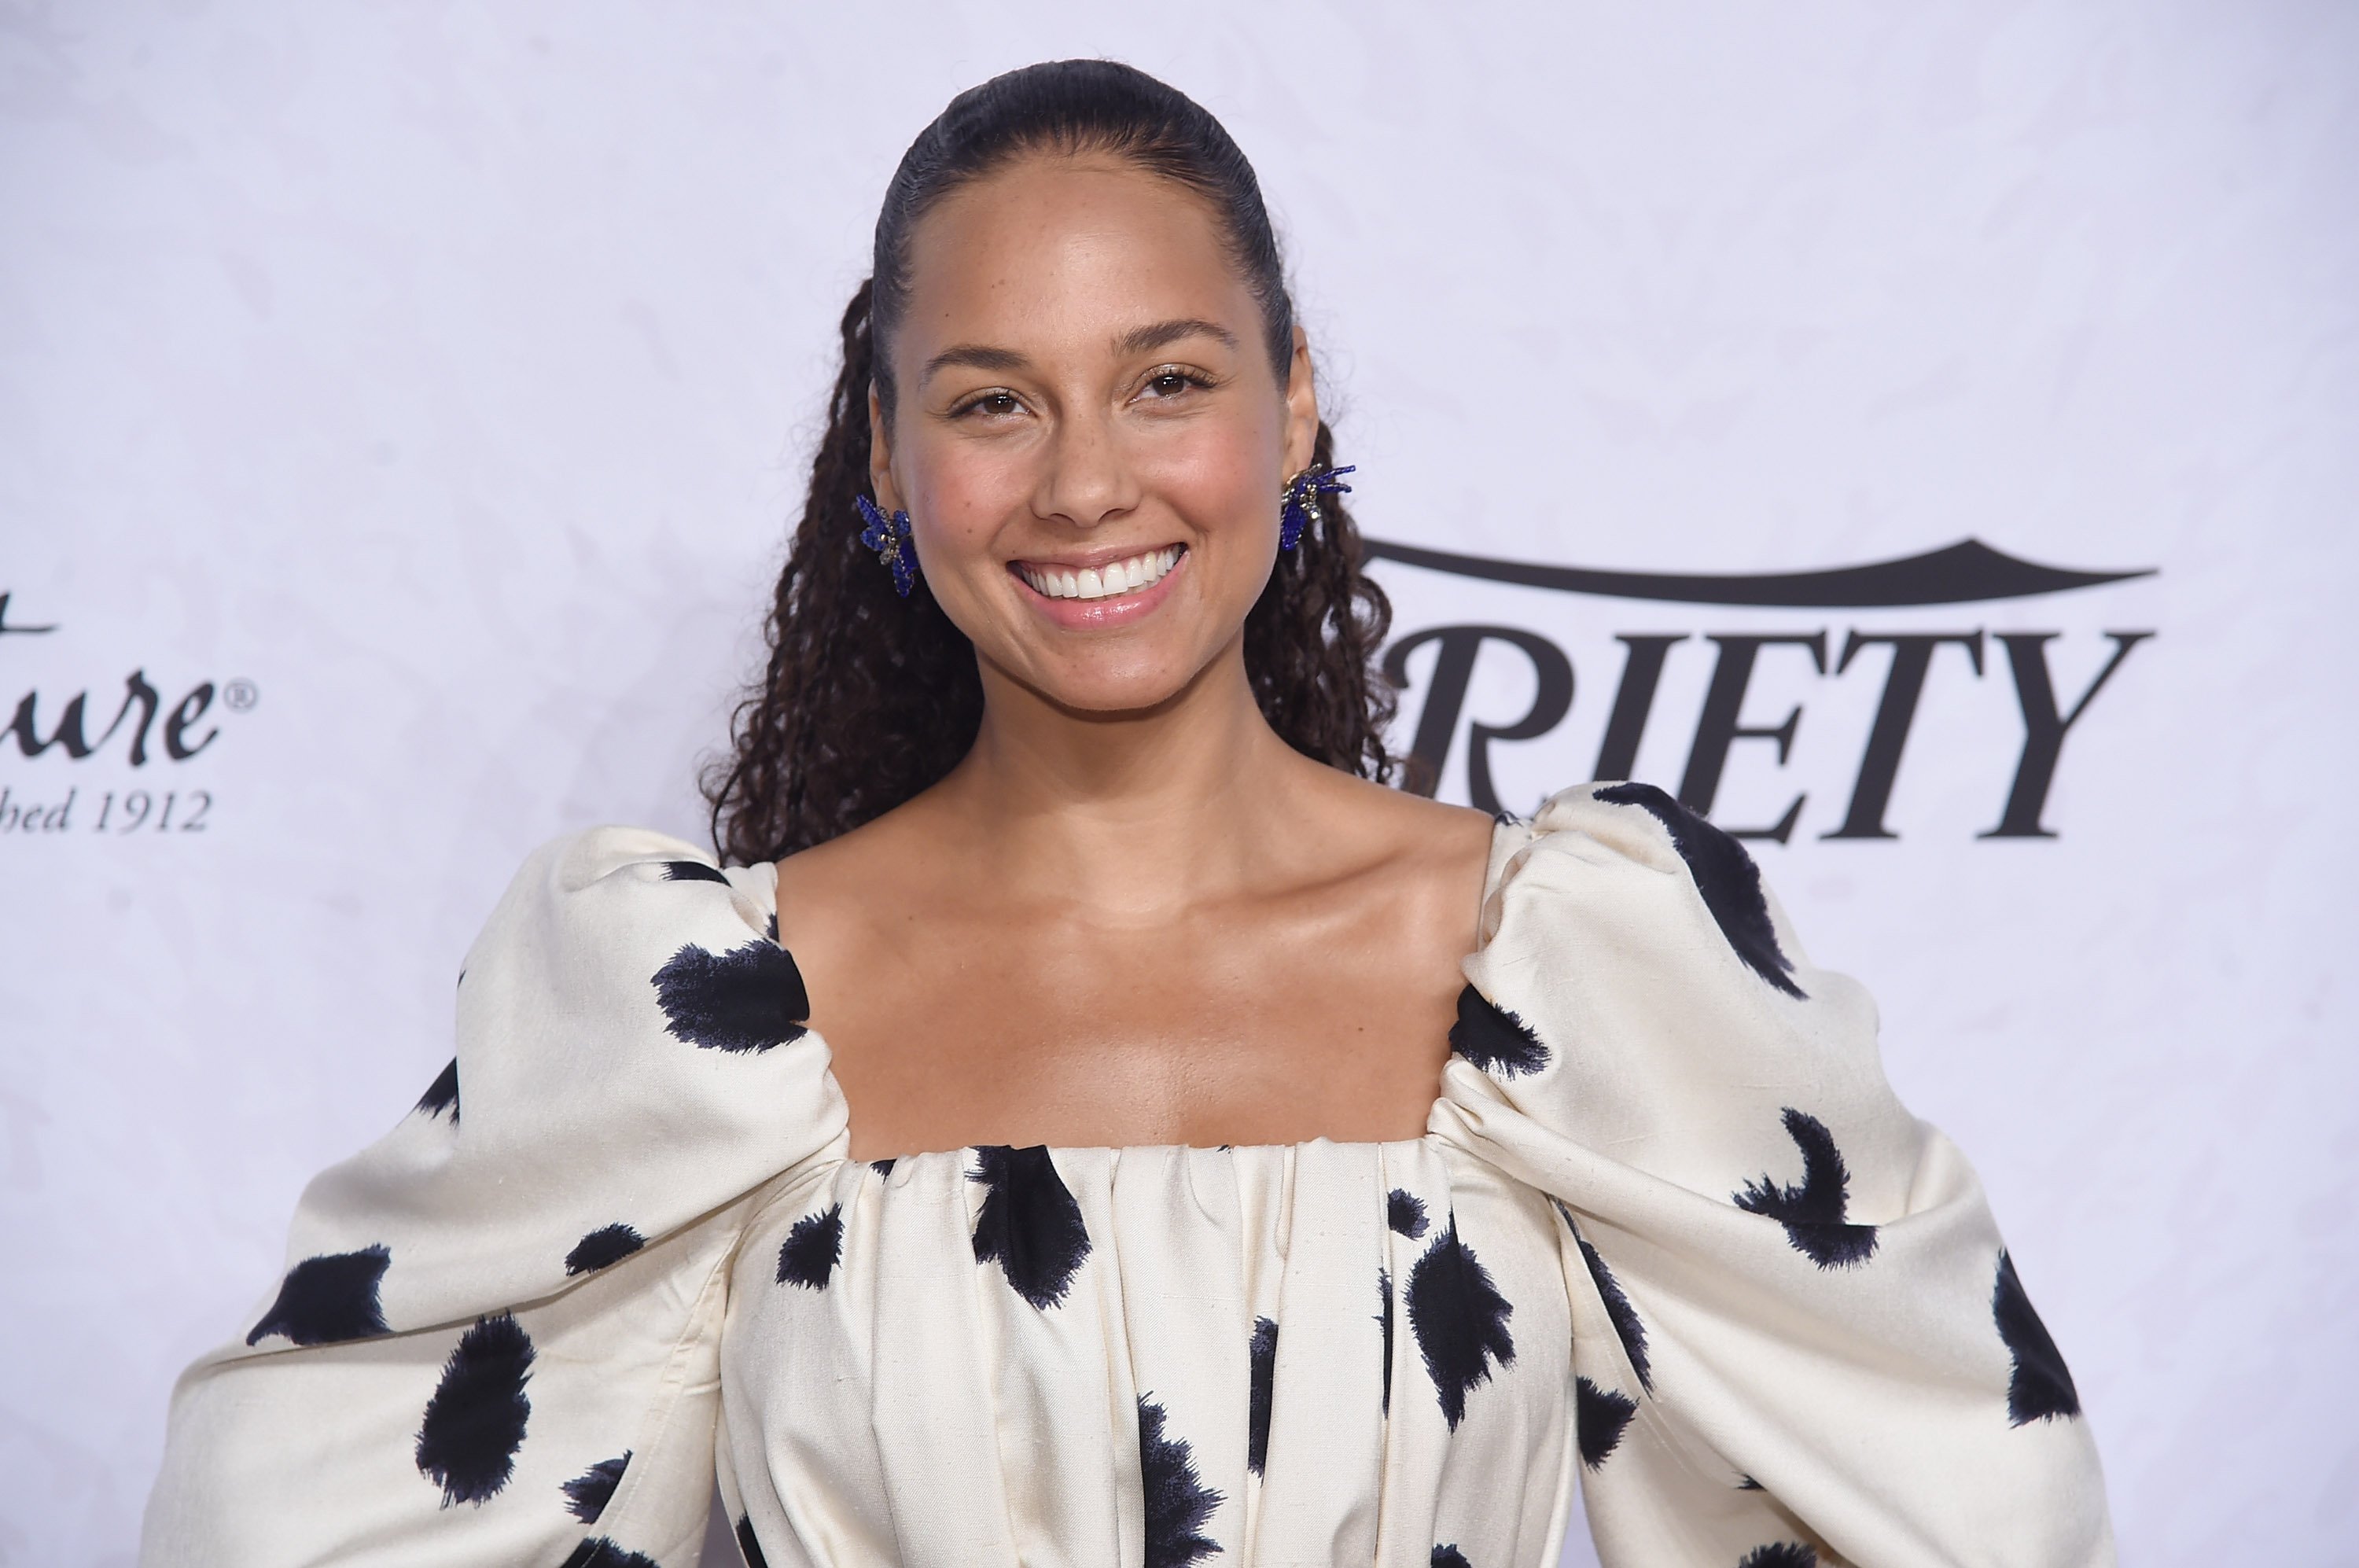 Alicia Keys at Variety's "Power of Women: New York" in April 2018. | Photo: Getty Images